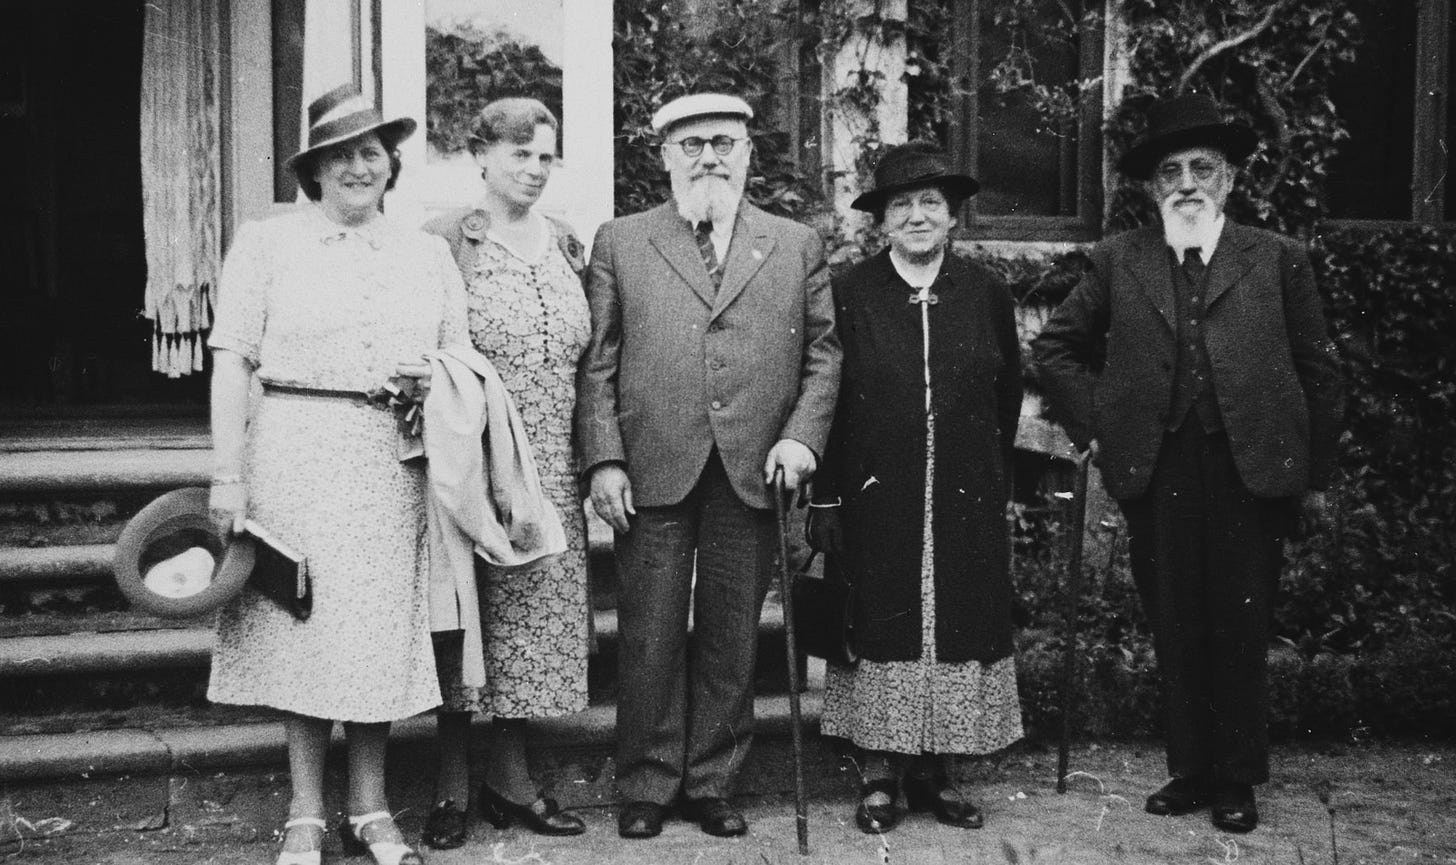 Five Danish Jews pose outside a home in Copenhagen.

Among those pictured are the Hartvigs, the grandparents of Hetty Fisch.